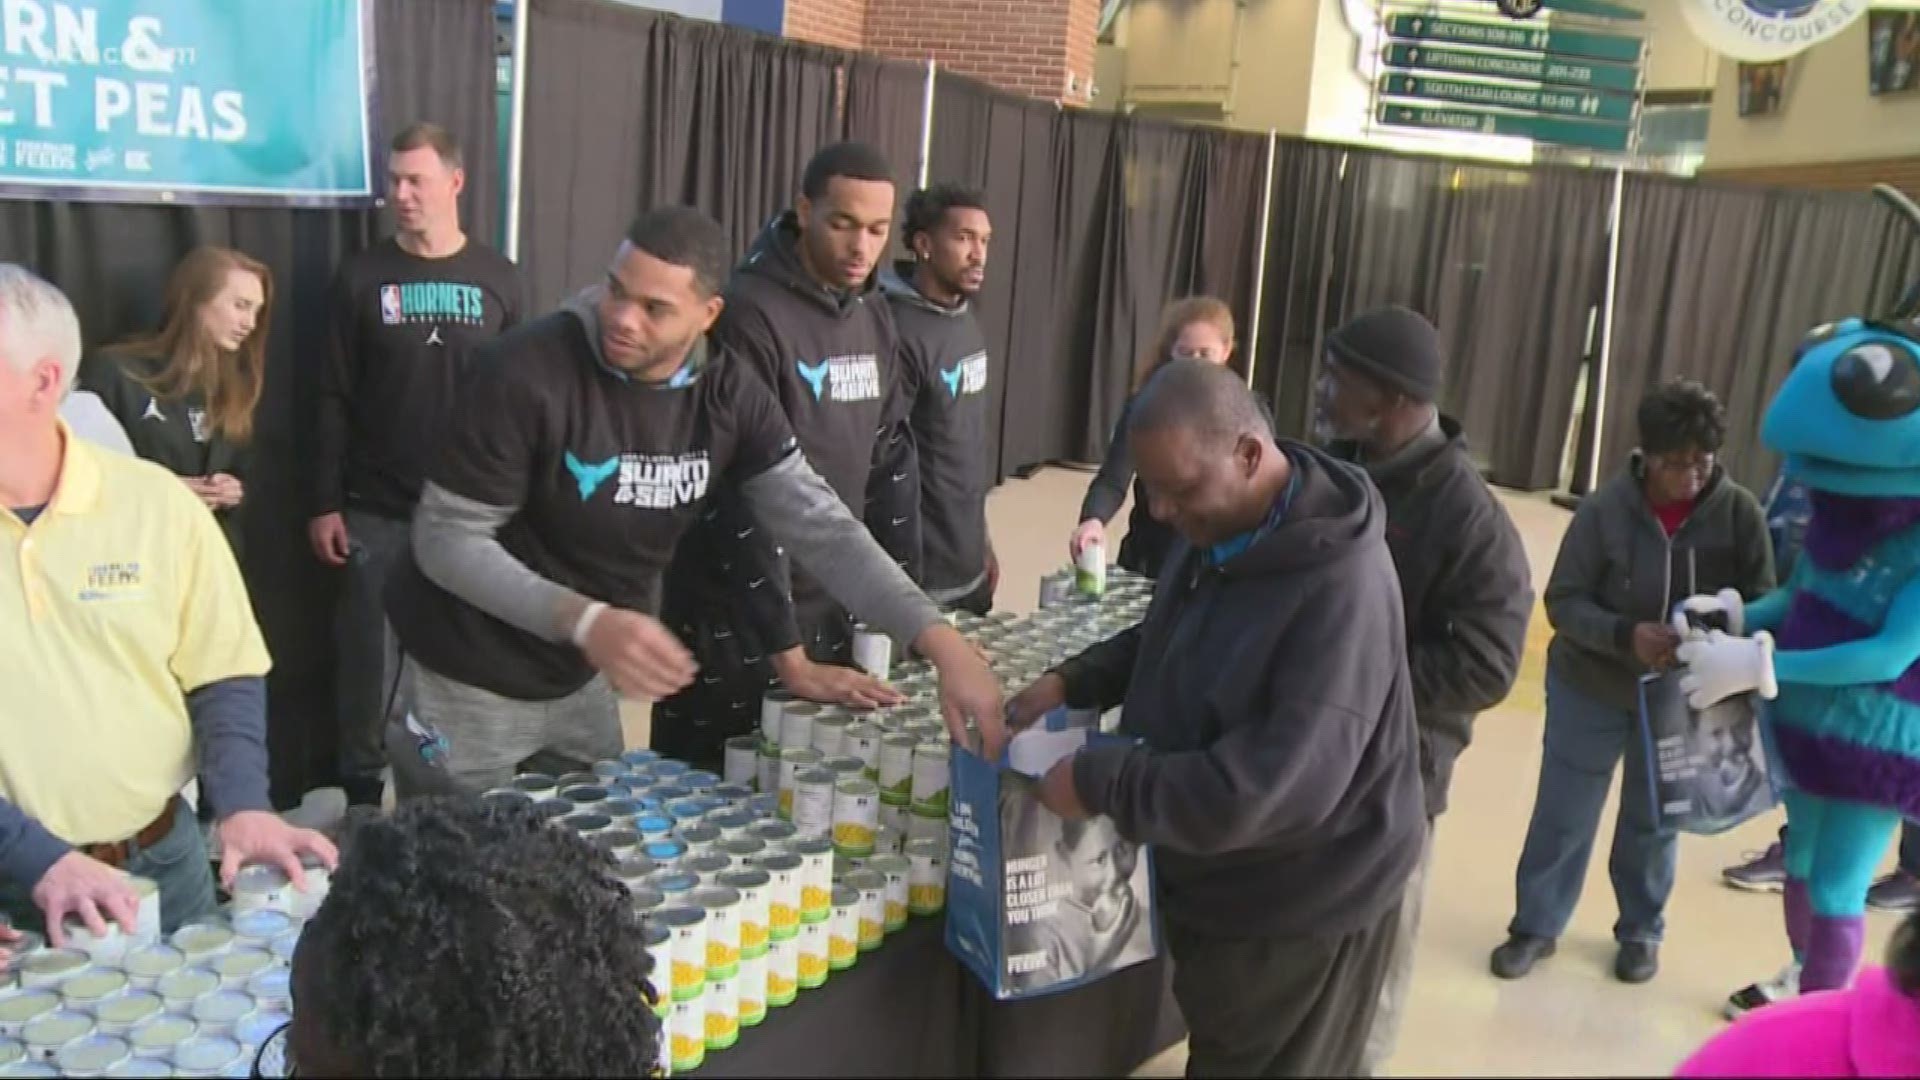 Like many organizations in Charlotte, the Hornets are taking time this holiday season to give back.